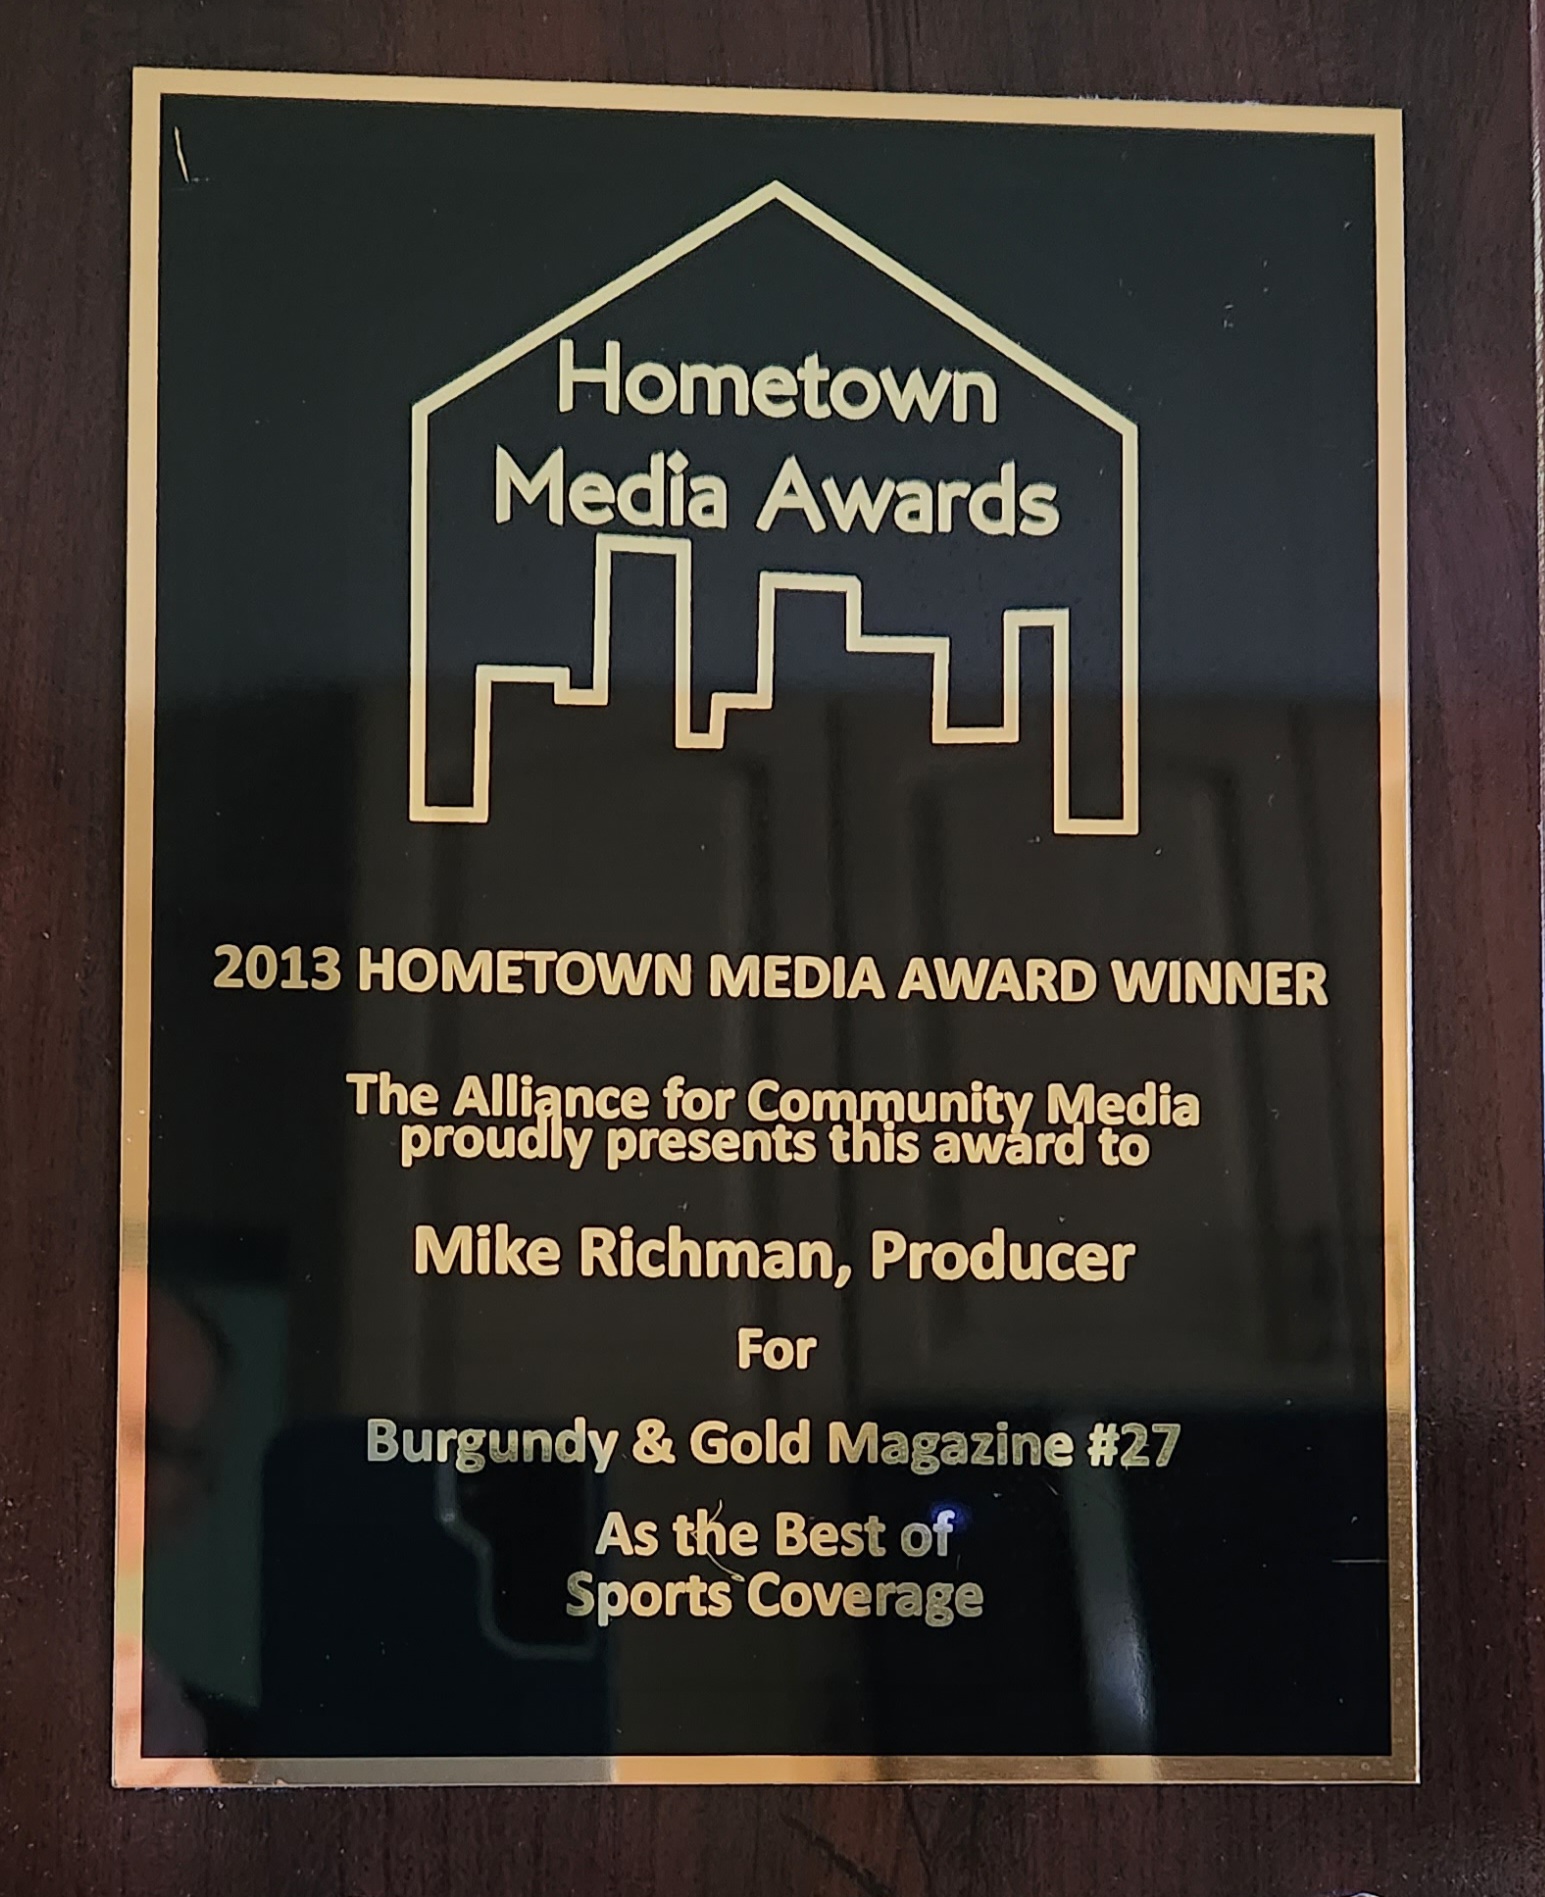 In 2013, the Alliance for Community Media, which represents more than 3,000 represents Public, Educational and Governmental (PEG) access organizations and community media centers in the country, presented Mike Richman with a "Hometown Media Award" for his production of the Redskins' TV show, "Burgundy & Gold Magazine." 